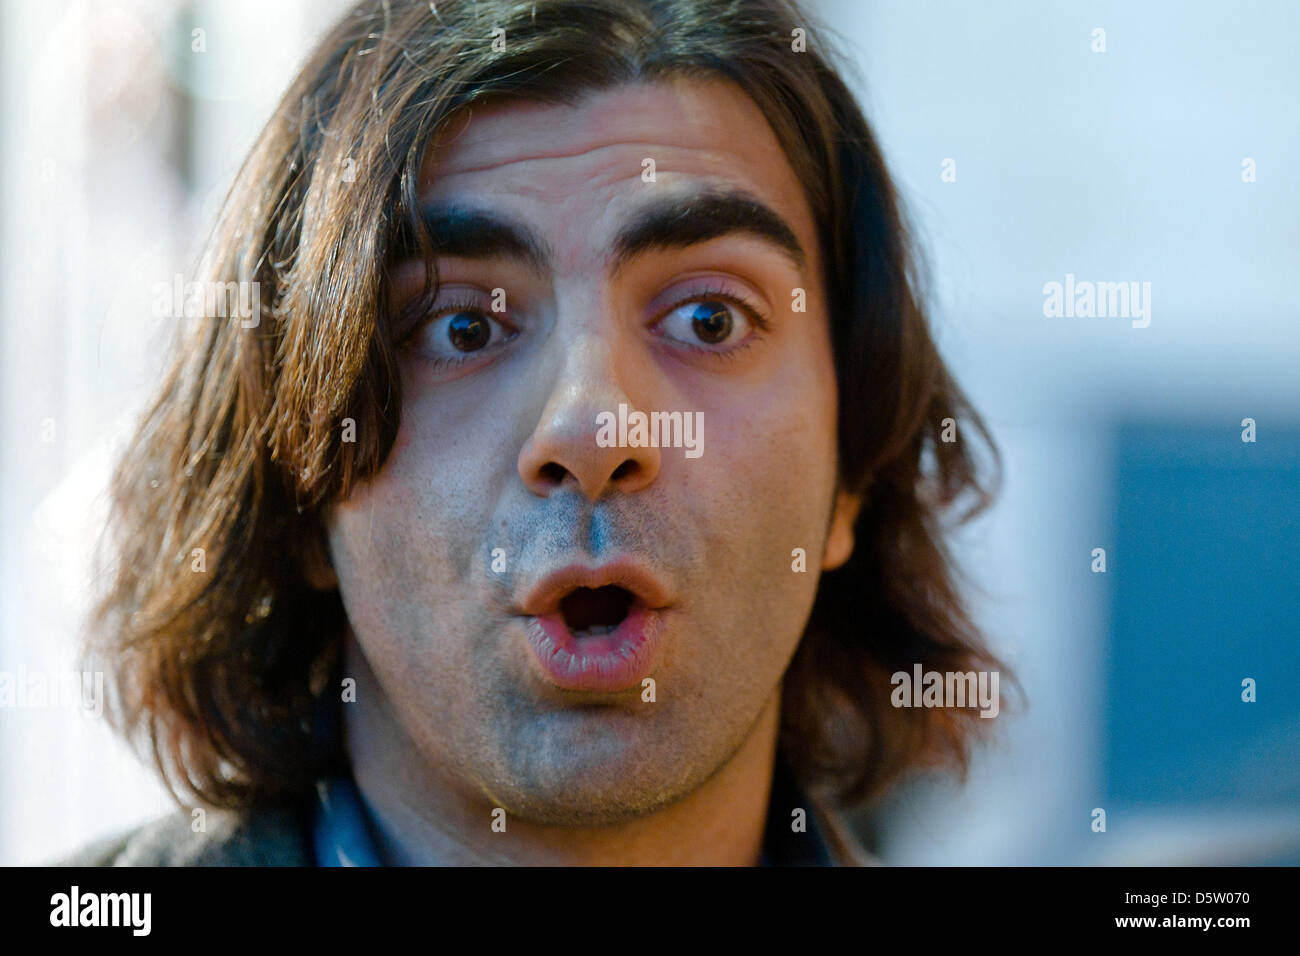 Director Fatih Akin arrives for the presentation of his film 'Trash in the garden of Eden' at the 20th Filmfest in Hamburg, Germany, 28 September 2012. The festival presents 140 productions from over 40 countries until 6 October. Photo: MARKUS SCHOLZ Stock Photo